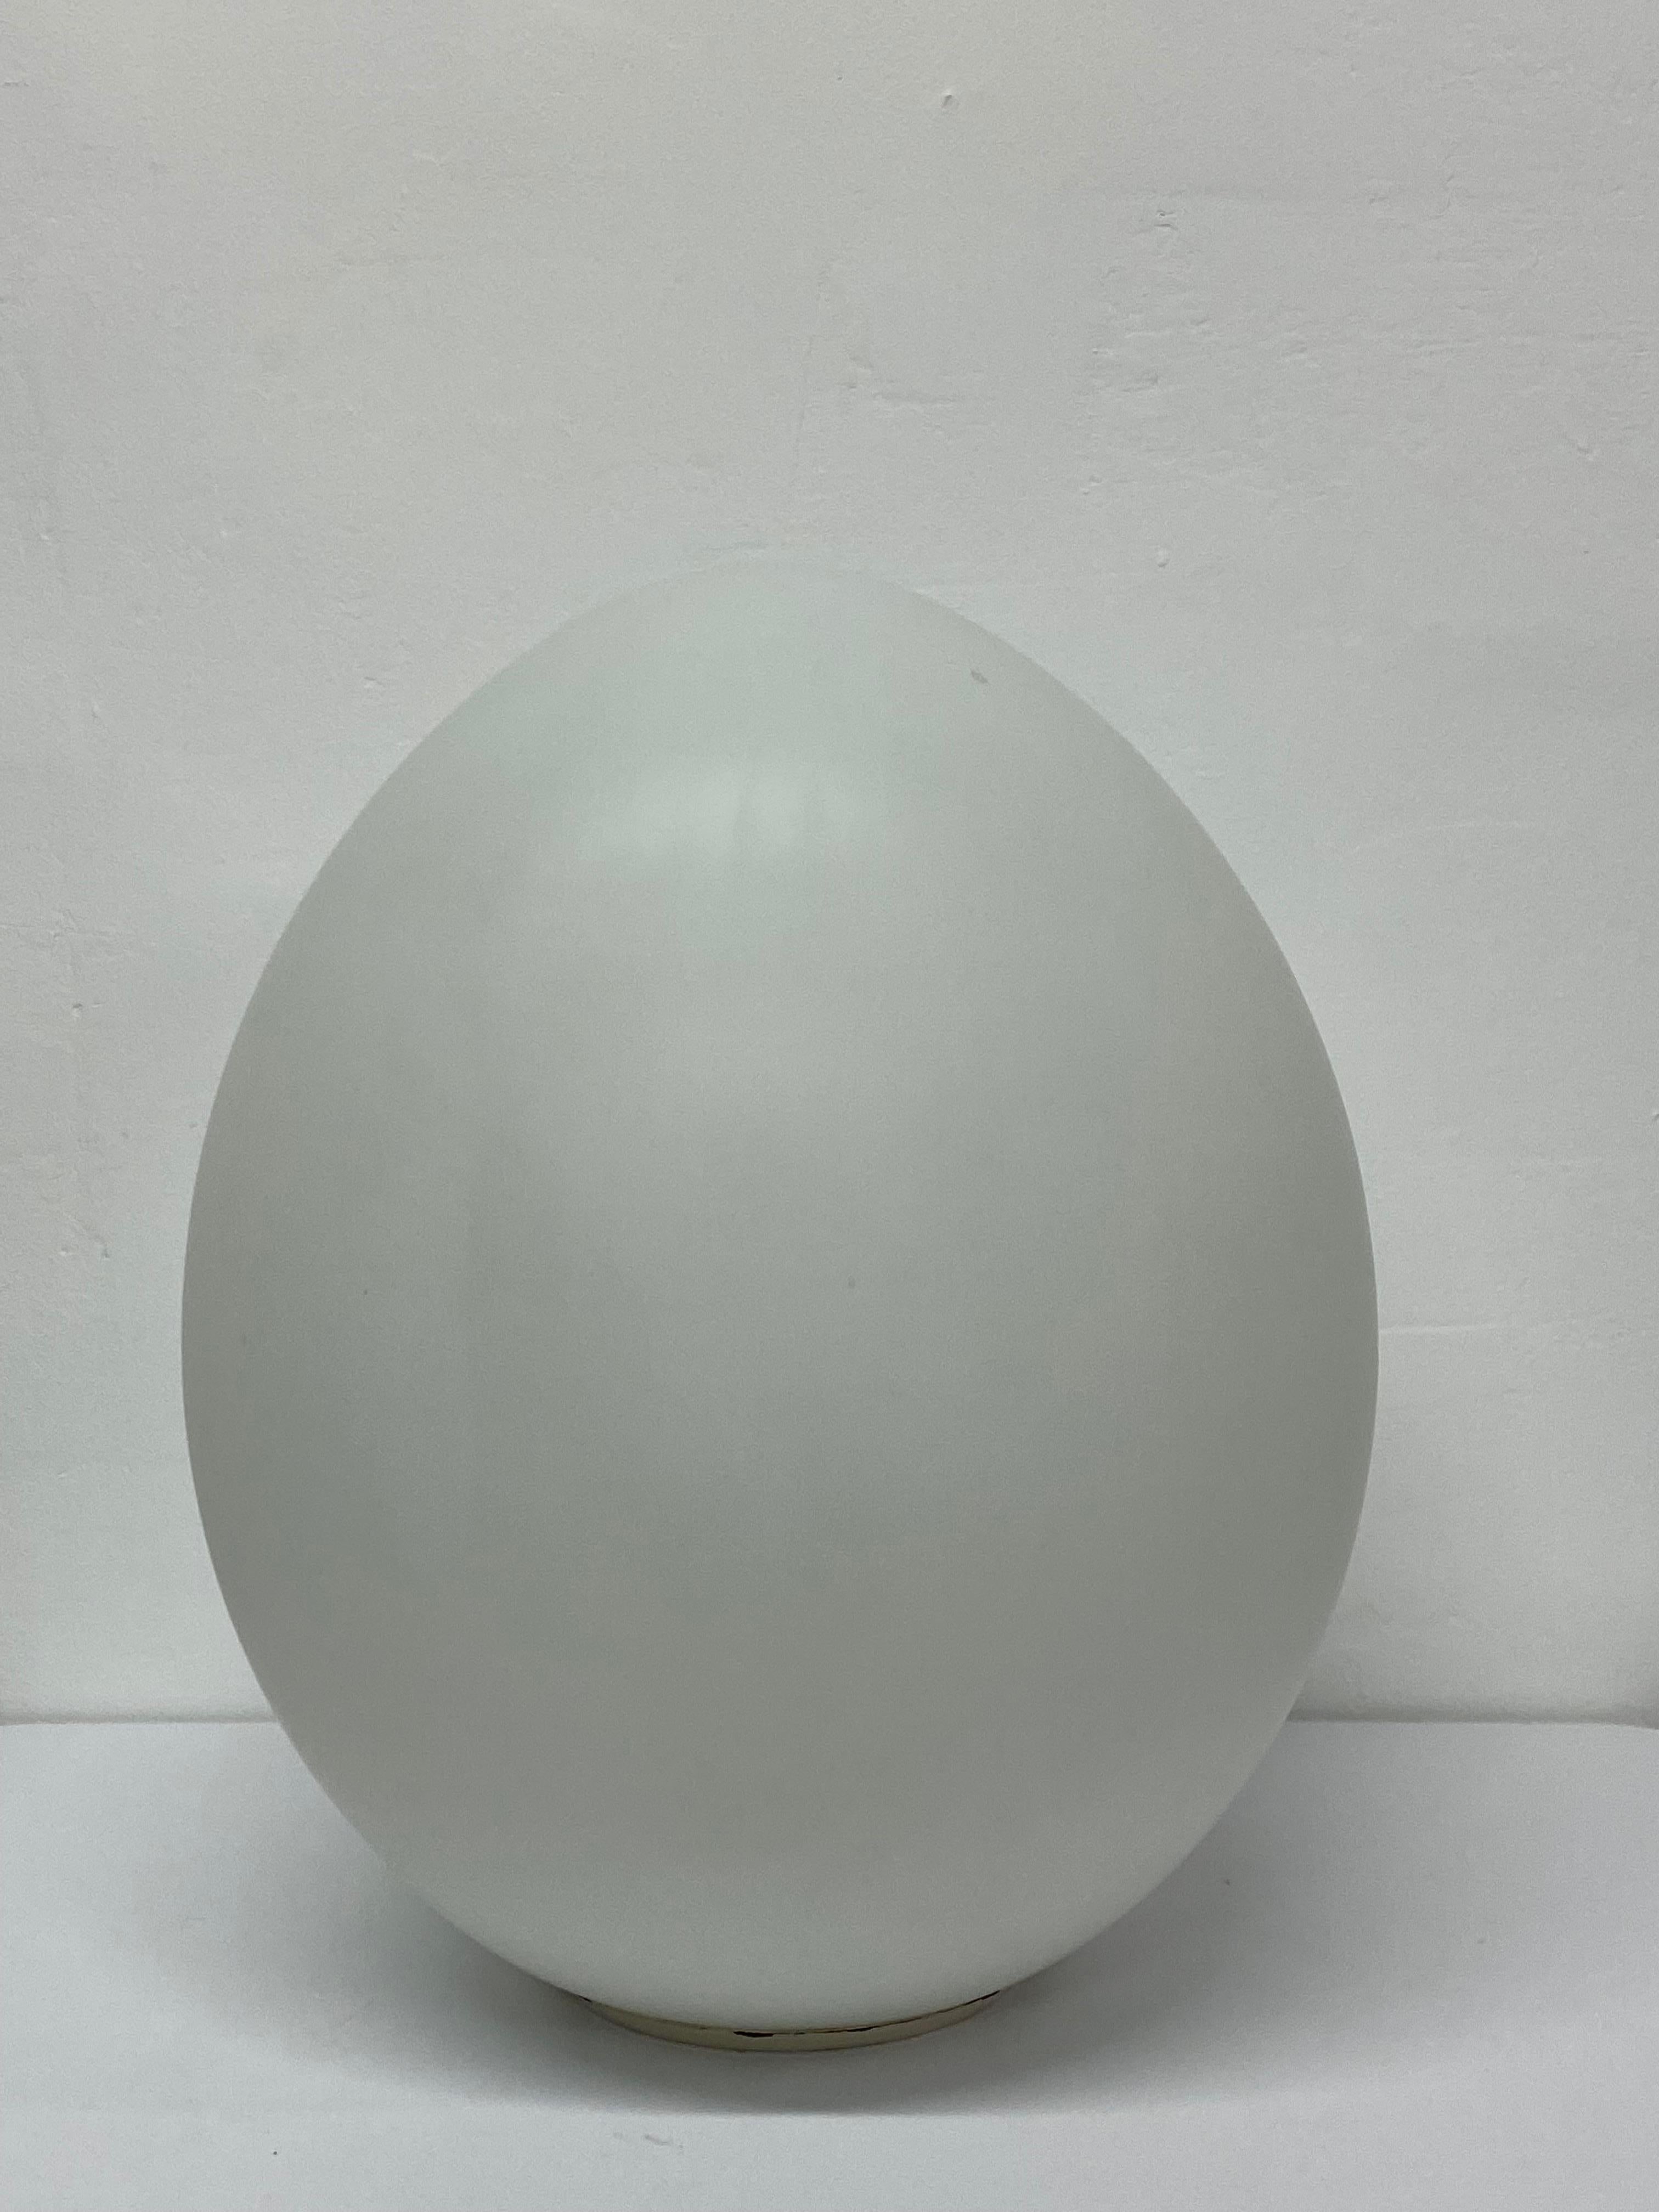 Large Mid-Century Modern frosted glass egg lamp with metal base by Laurel Lamp Company, 1970s.